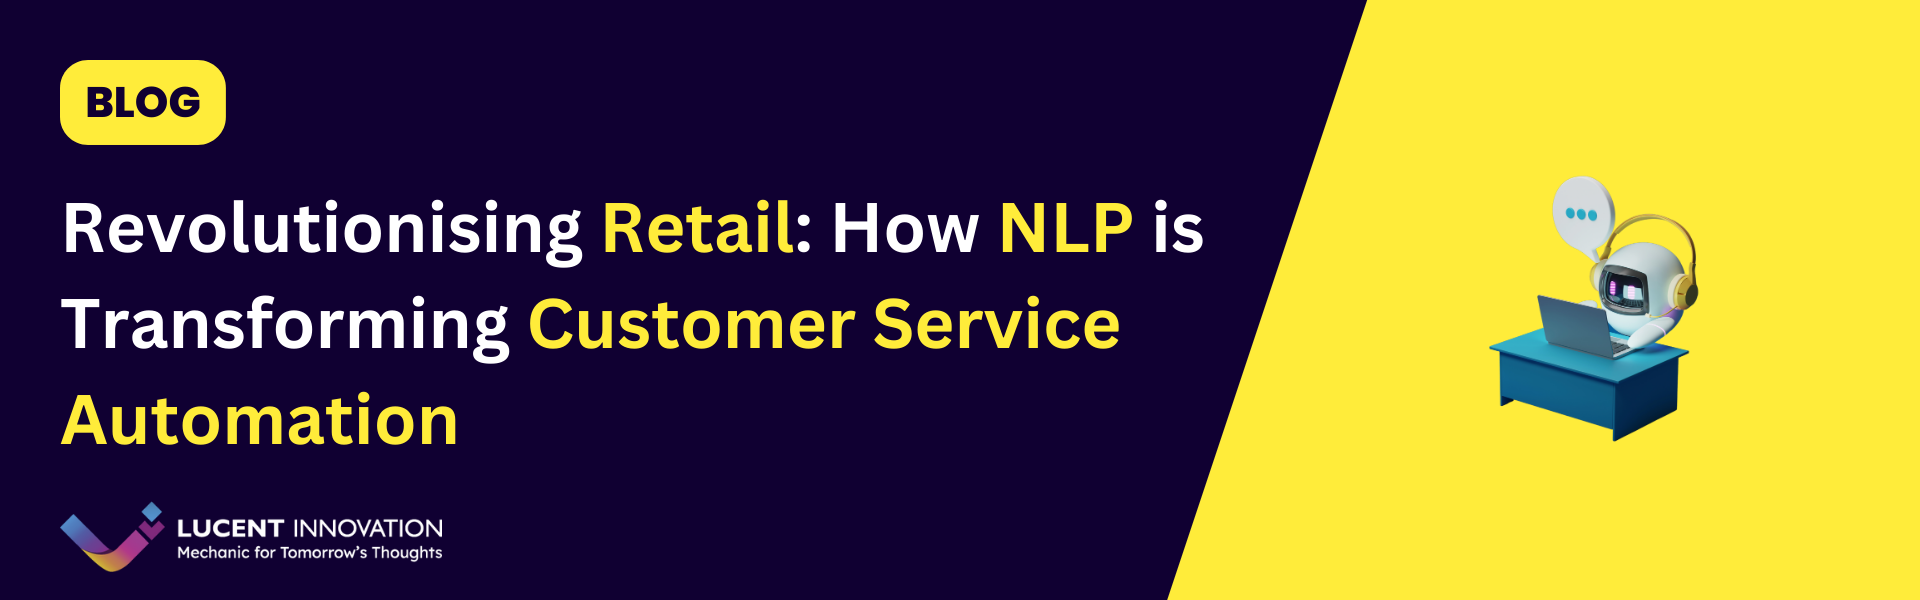 Revolutionising Retail: How NLP is Transforming Customer Service Automation